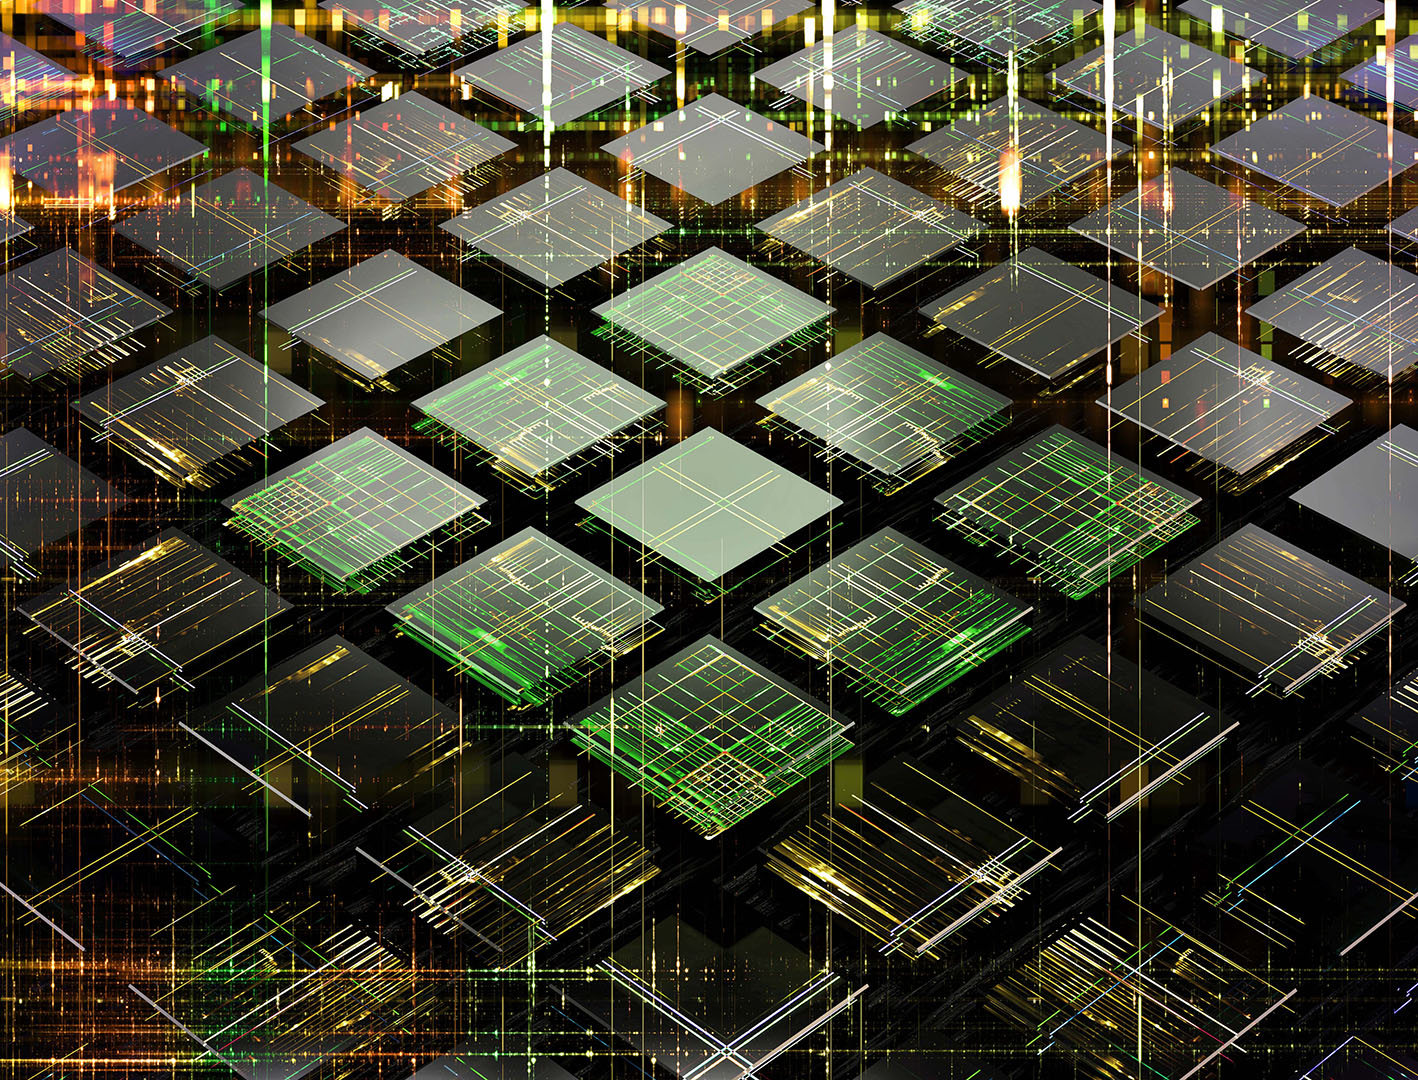 Green microchips lined up in an artistic rendering.